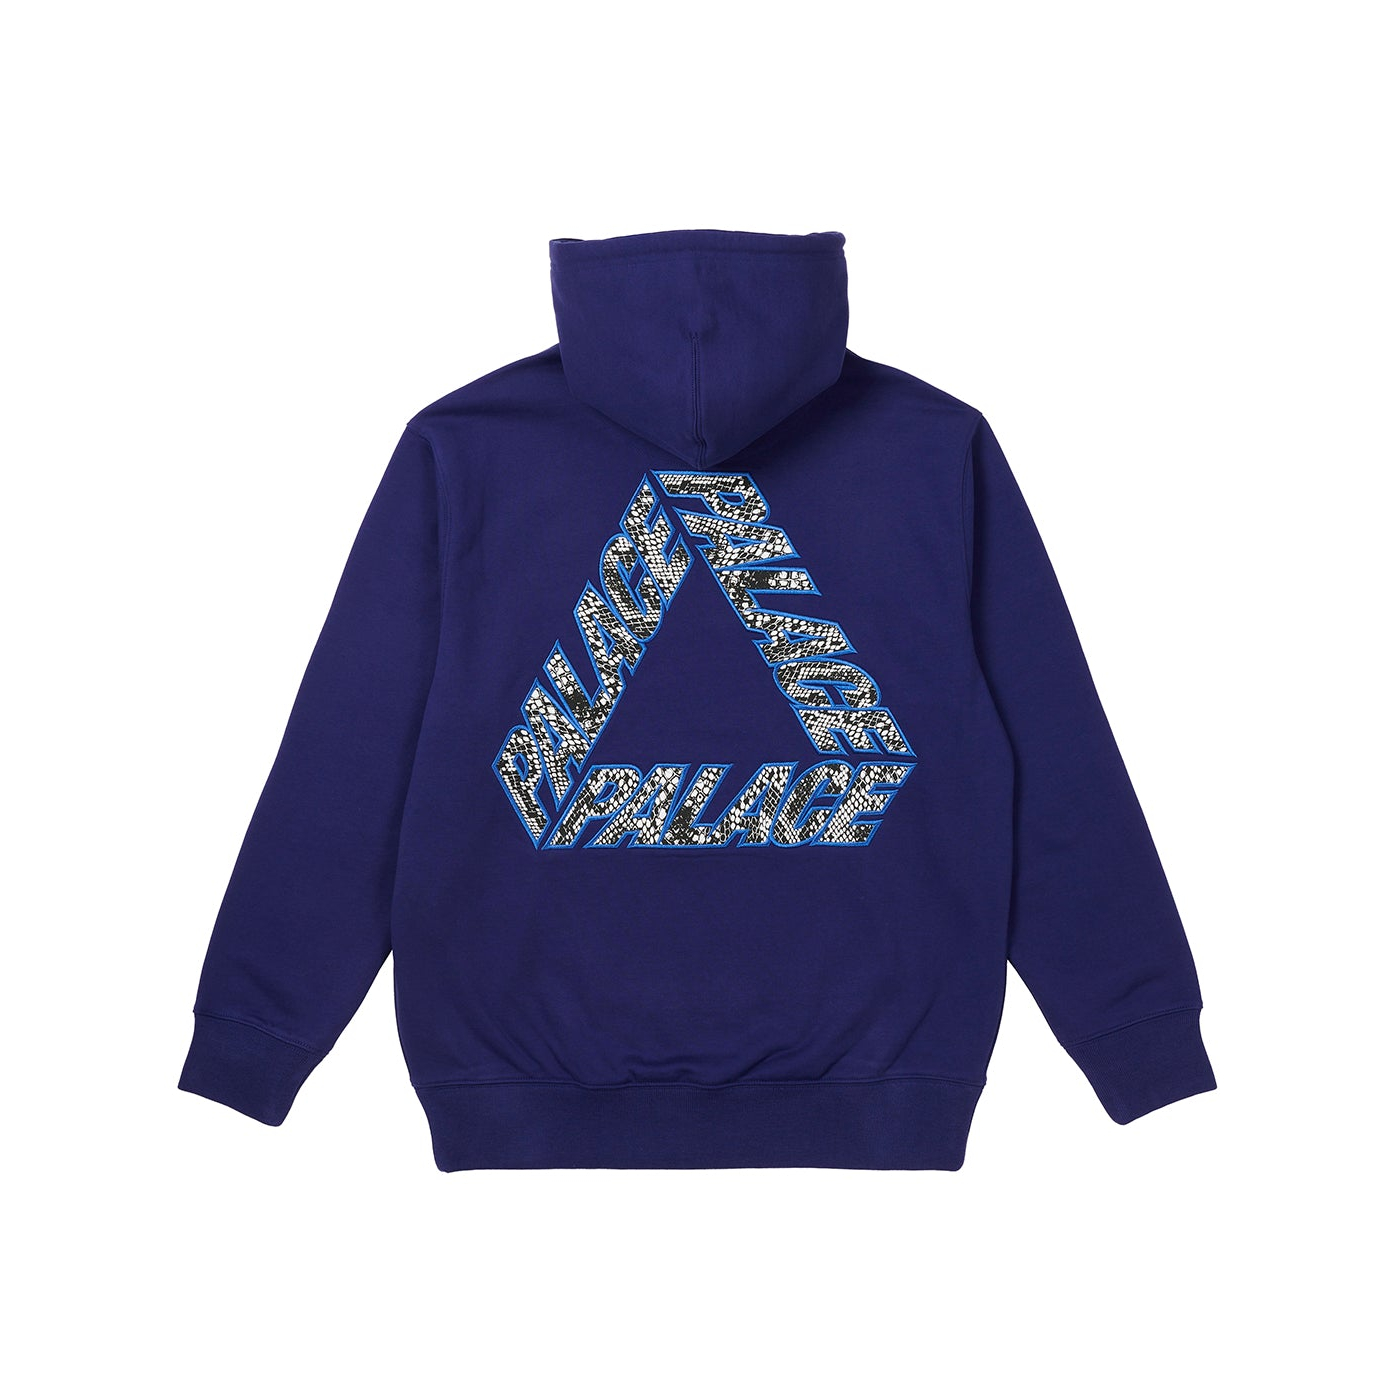 Thumbnail P-3 SNAKE APPLIQUE HOOD NAVY one color